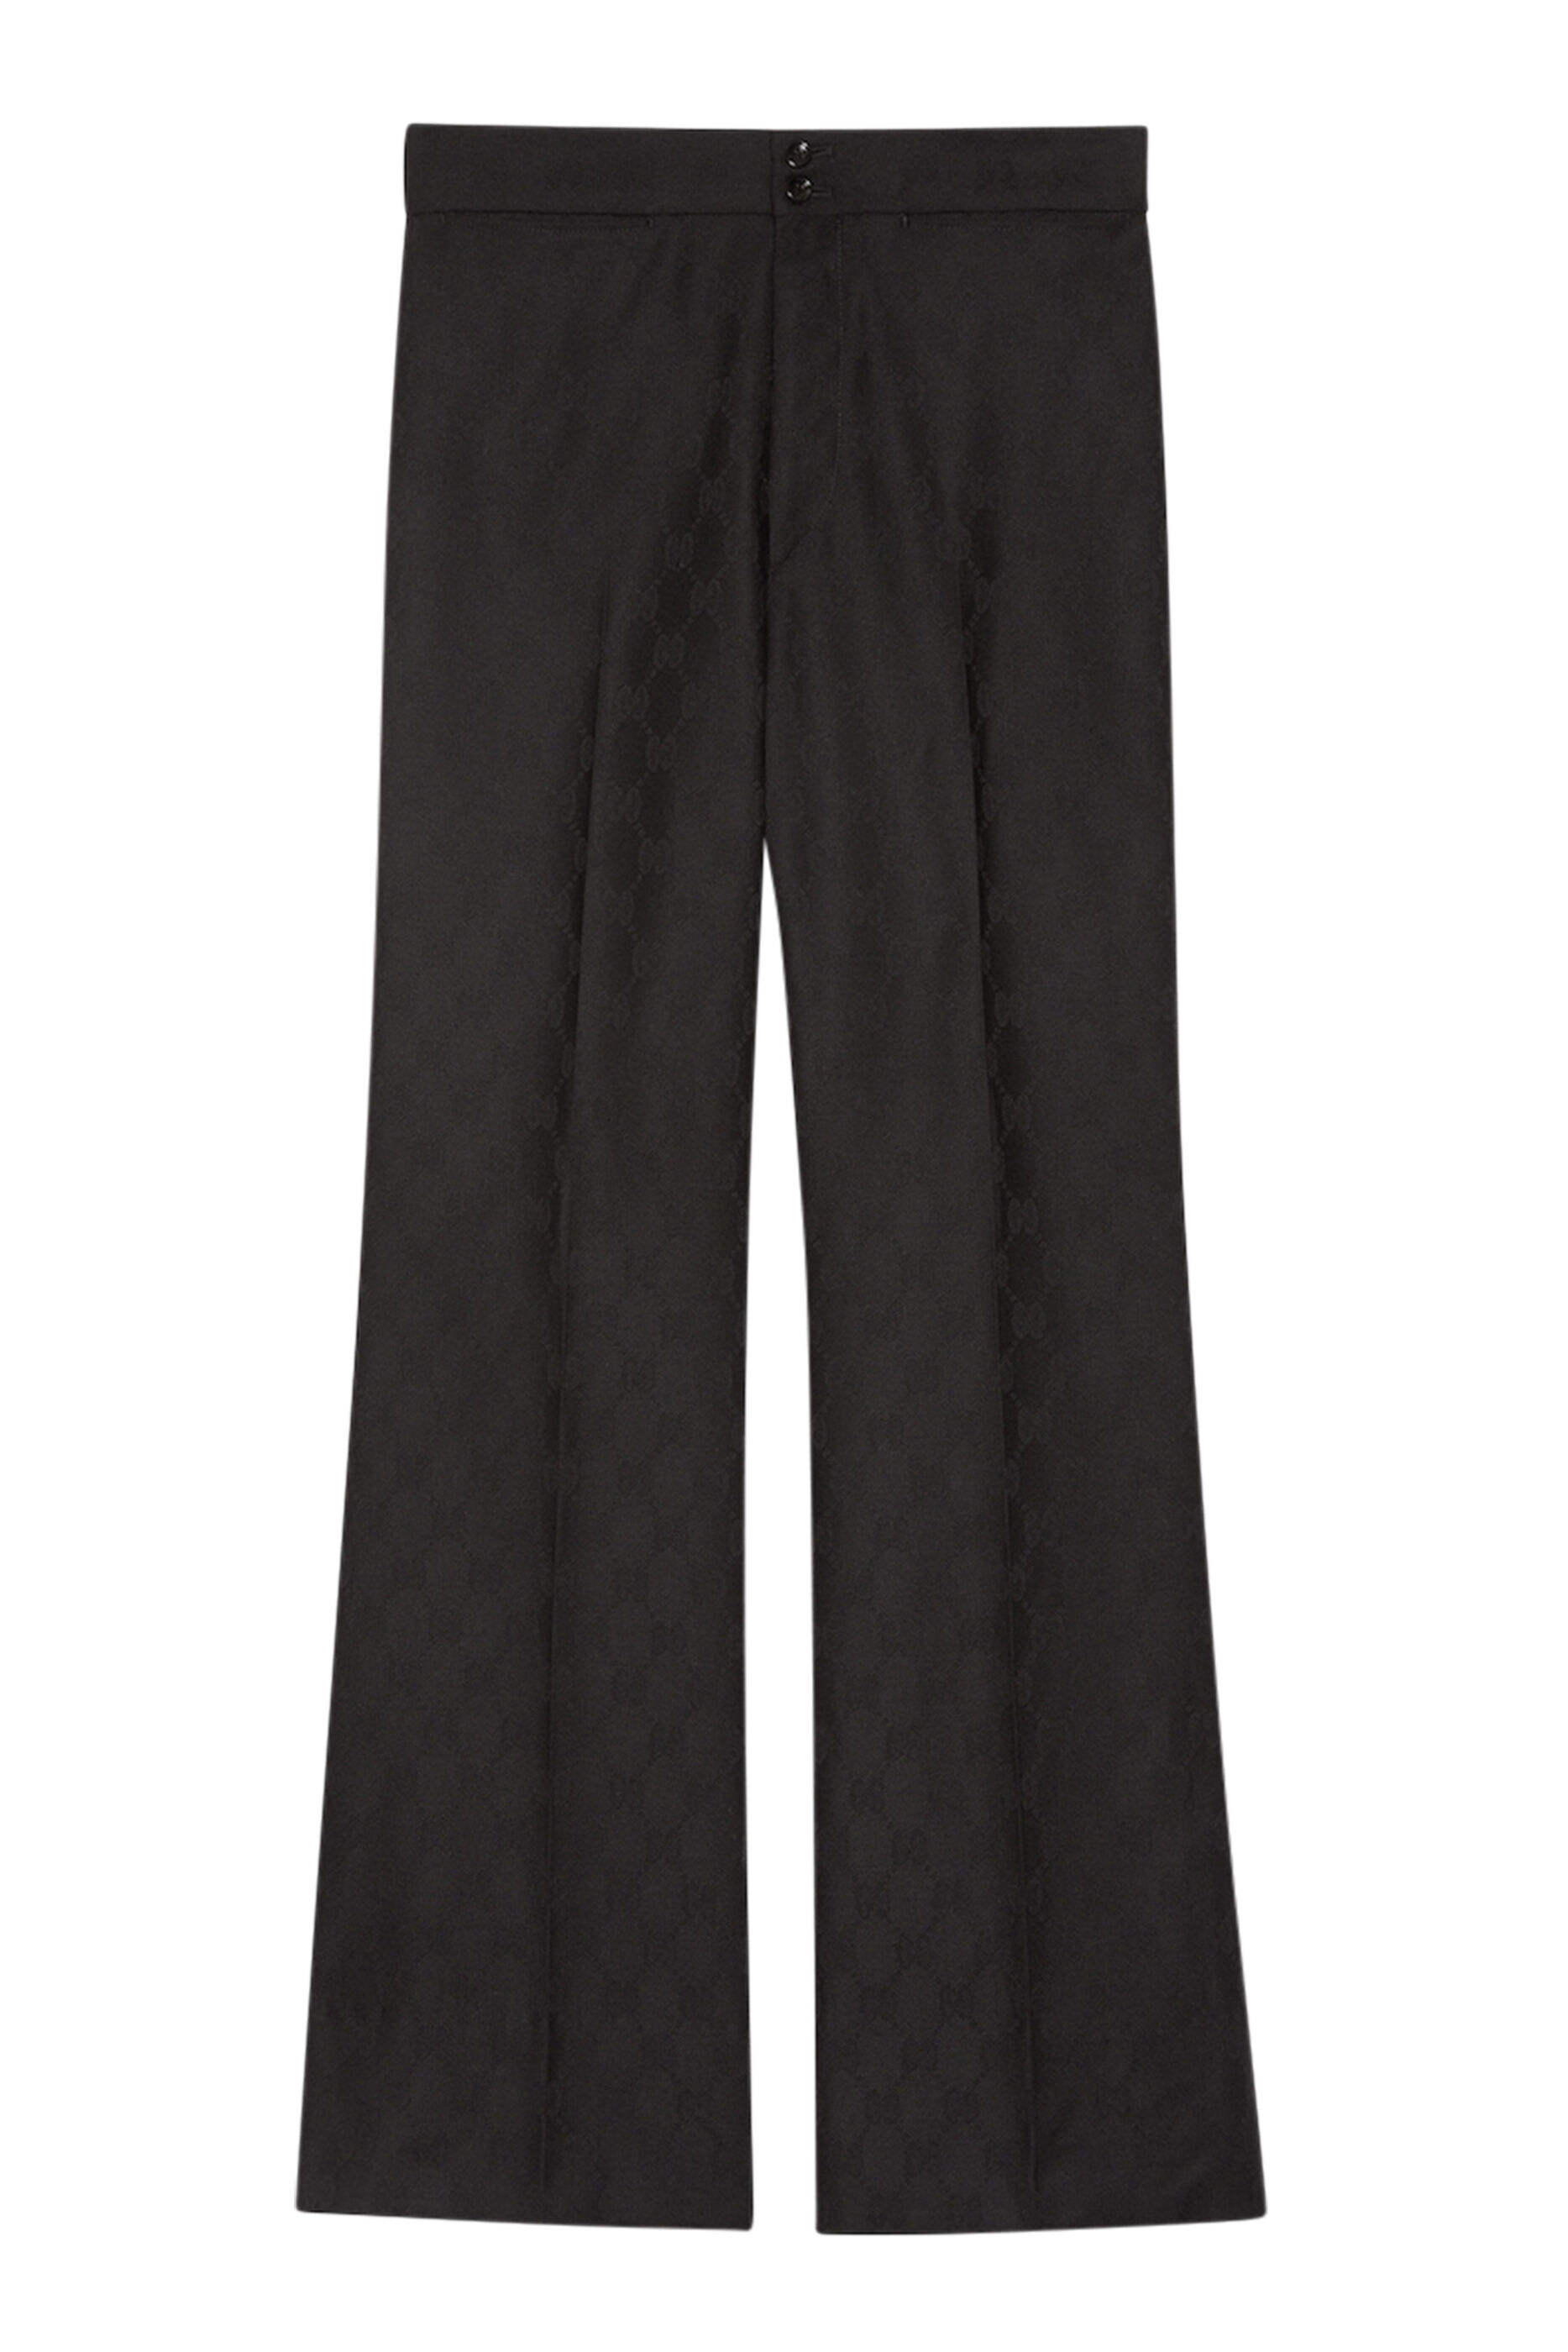 Gucci Green 'GG' Canvas Trousers - ShopStyle Pants